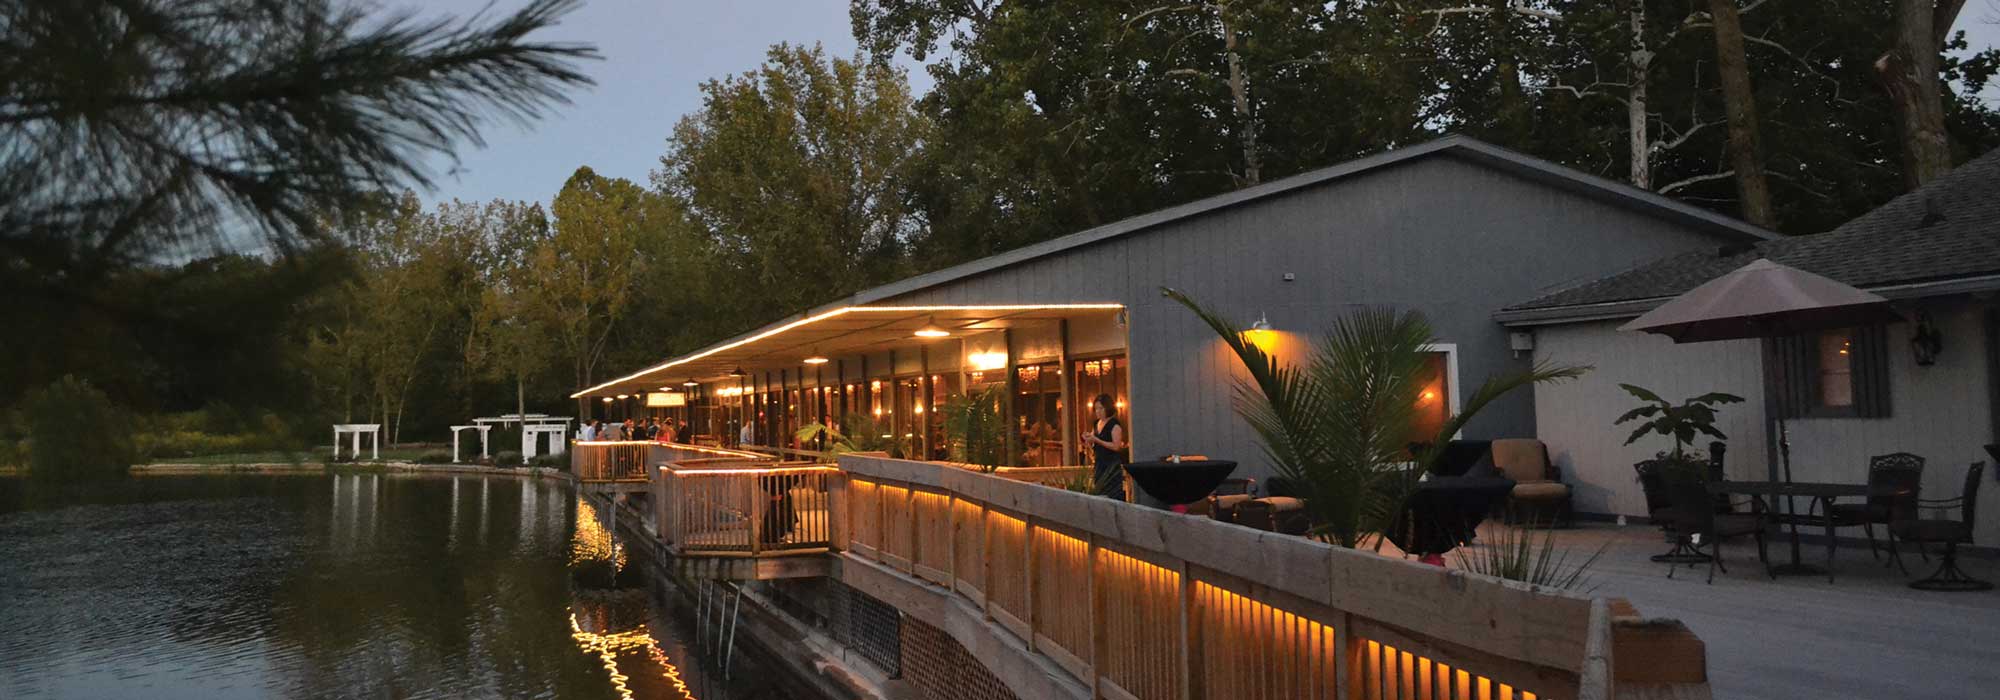 The lakefront event, The Lodge at The Willows, is a unique evening event venue